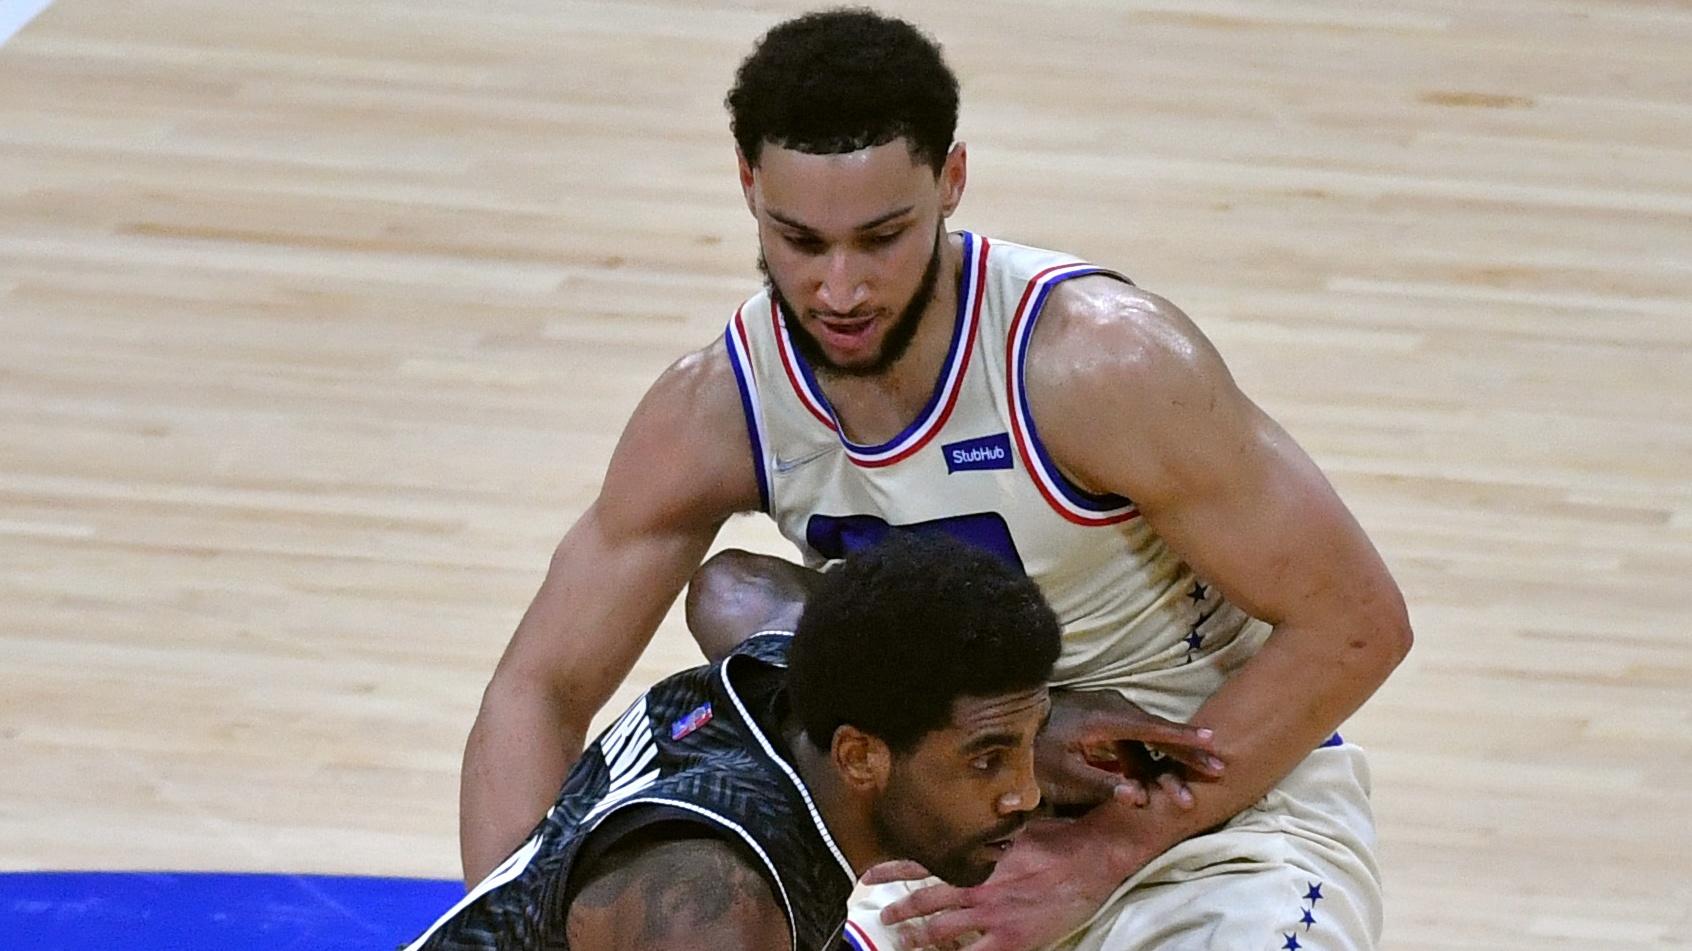 Apr 14, 2021; Philadelphia, Pennsylvania, USA; Brooklyn Nets guard Kyrie Irving (11) is guarded by Philadelphia 76ers guard Ben Simmons (25) during the second quarter at Wells Fargo Center. Mandatory Credit: Eric Hartline-USA TODAY Sports / © Eric Hartline-USA TODAY Sports